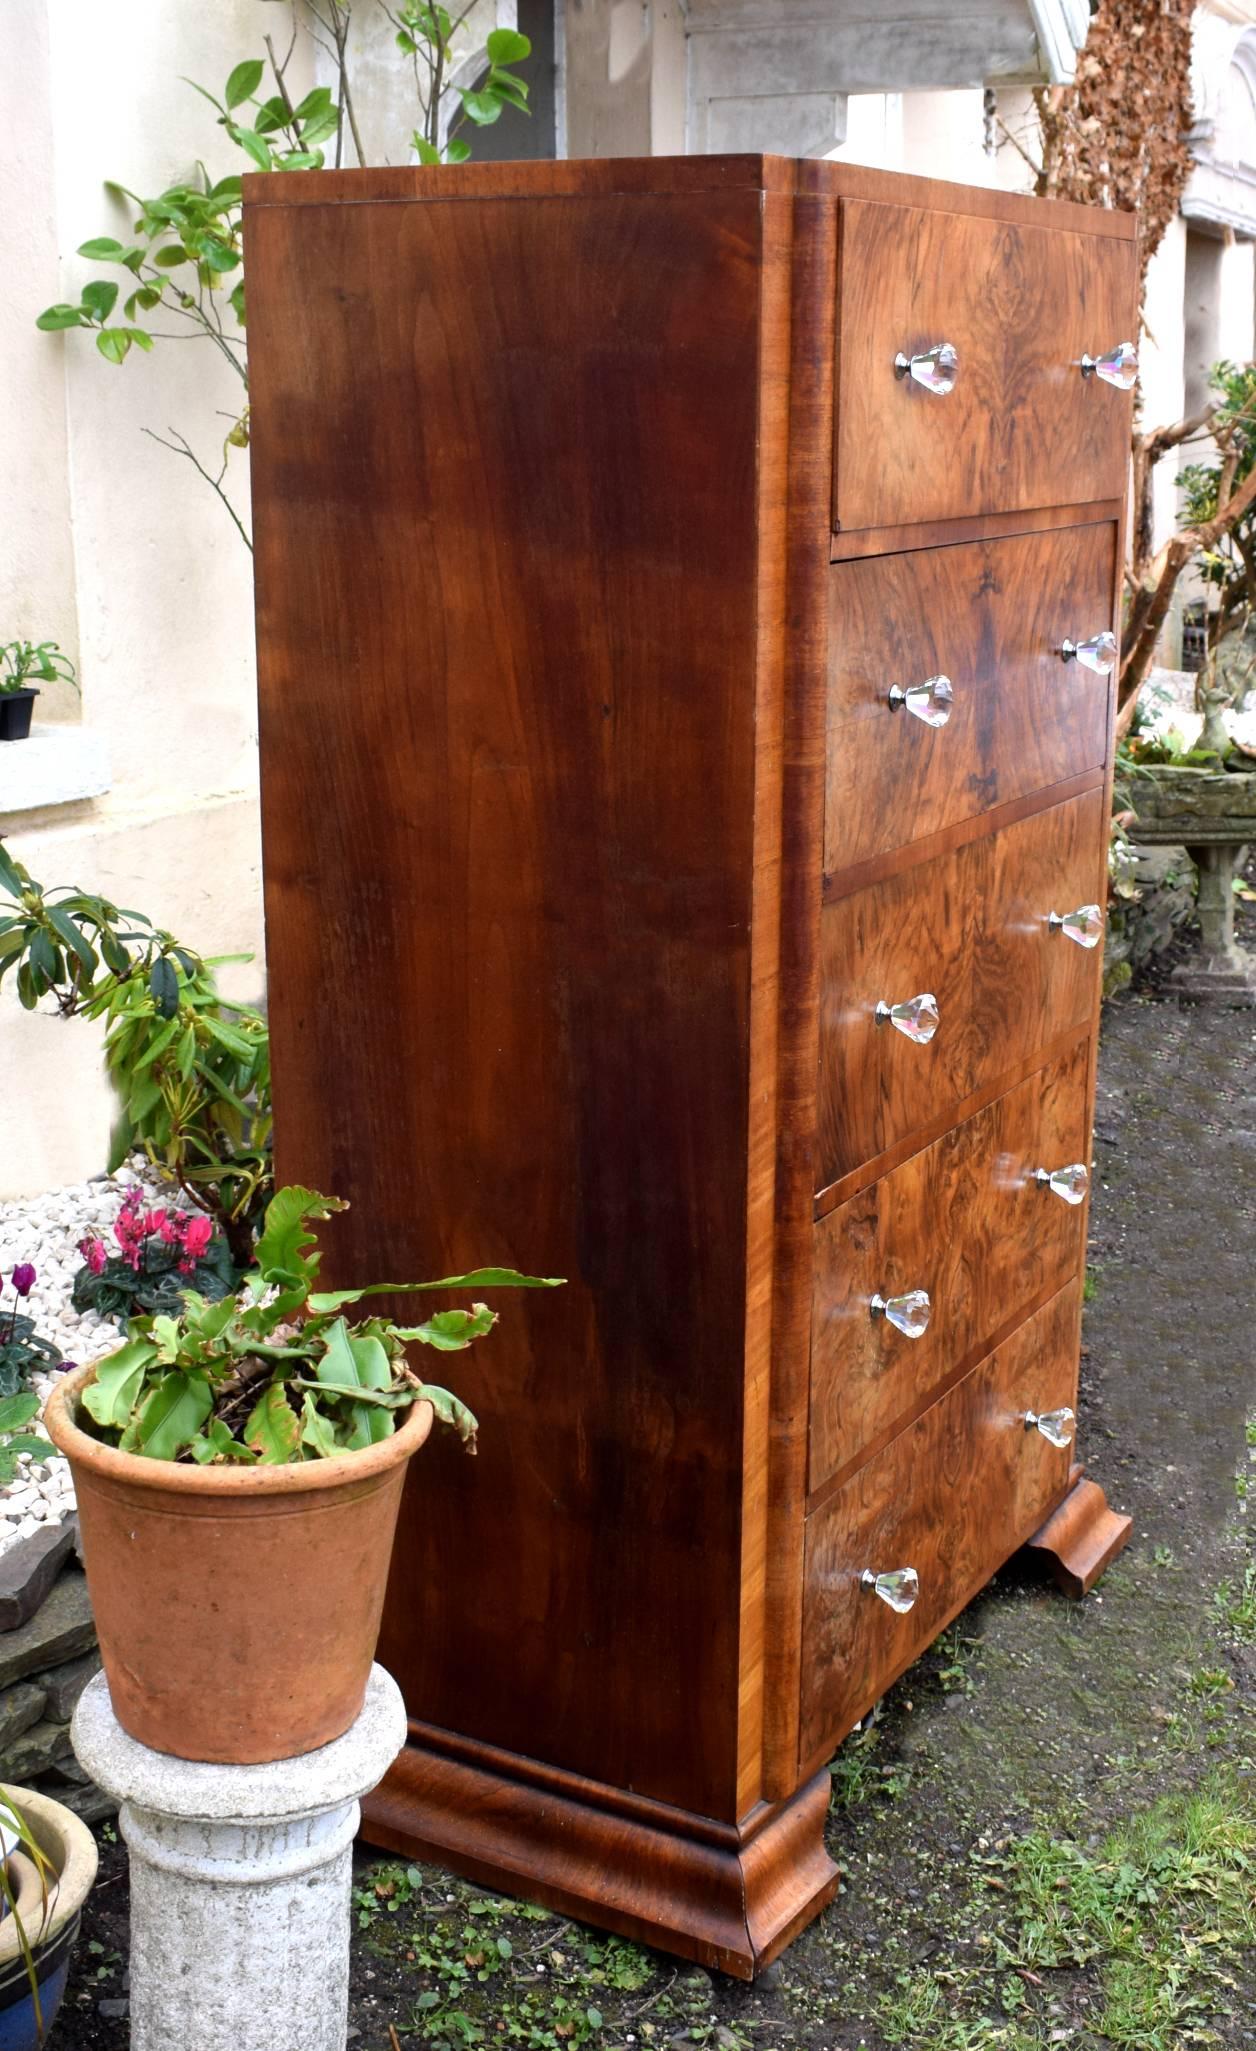 This is without doubt of one the best Art Deco chest of drawers we've been able to source in a very long while. Originating from England and dating to the mid-1930s, the set of drawers has the highest craftsmanship in both it's make and timbers